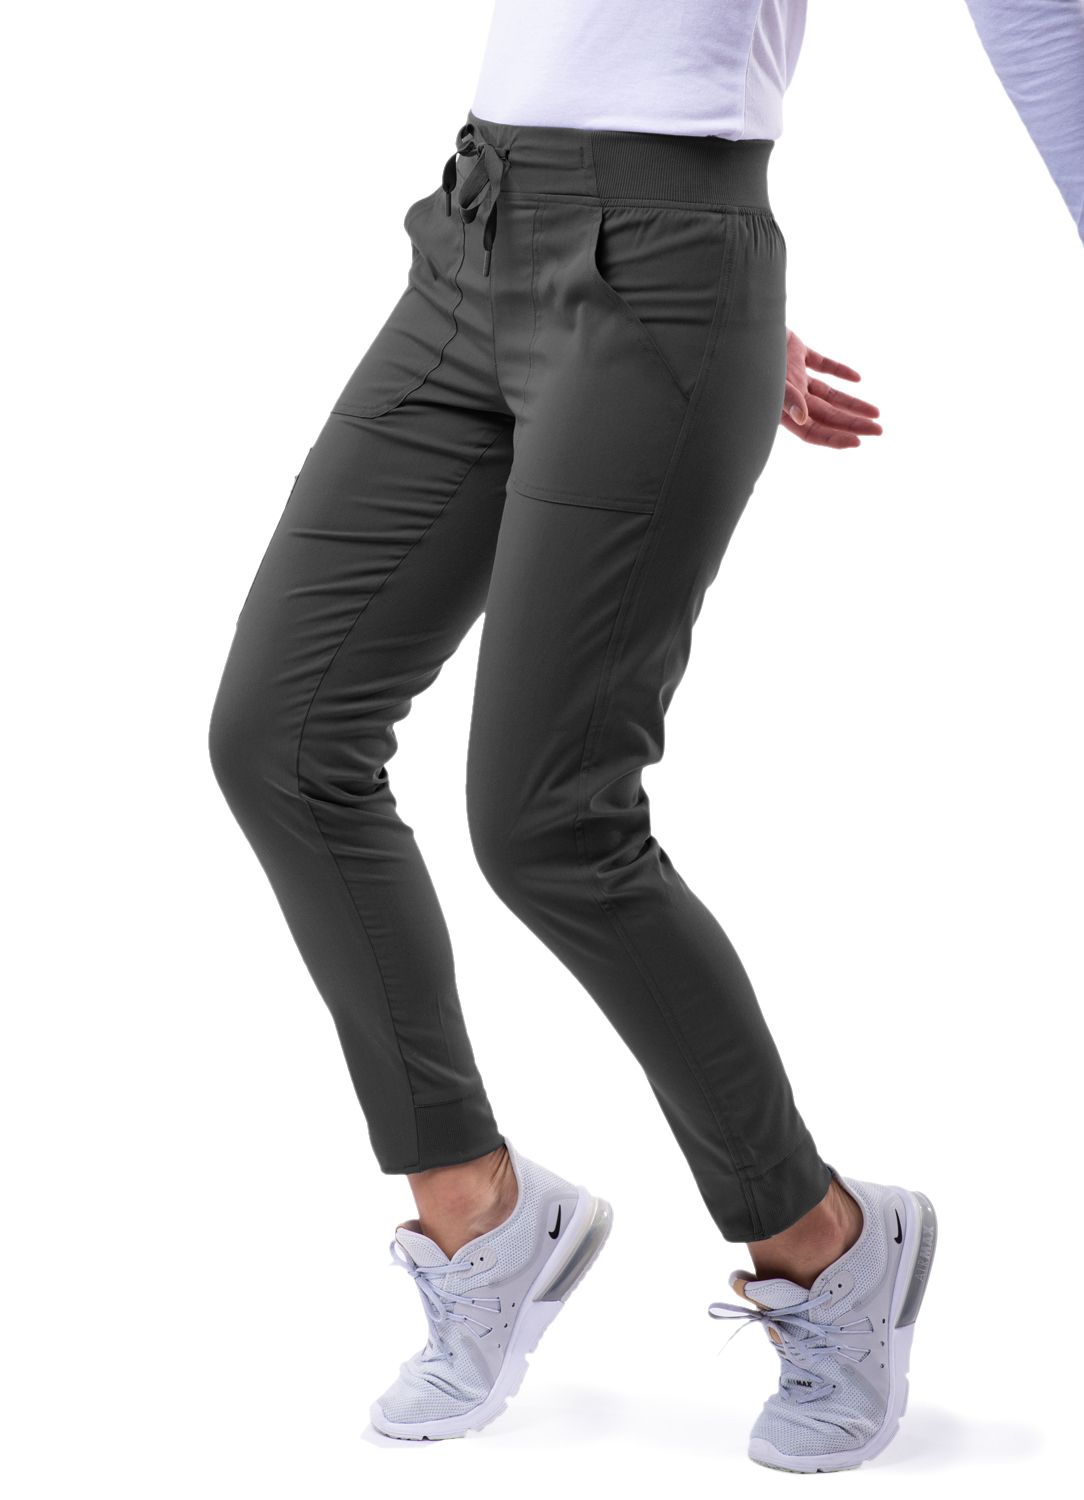 Women's Ultimate Yoga Jogger Pant (Tall)  by Adar XS-L /  PEWTER